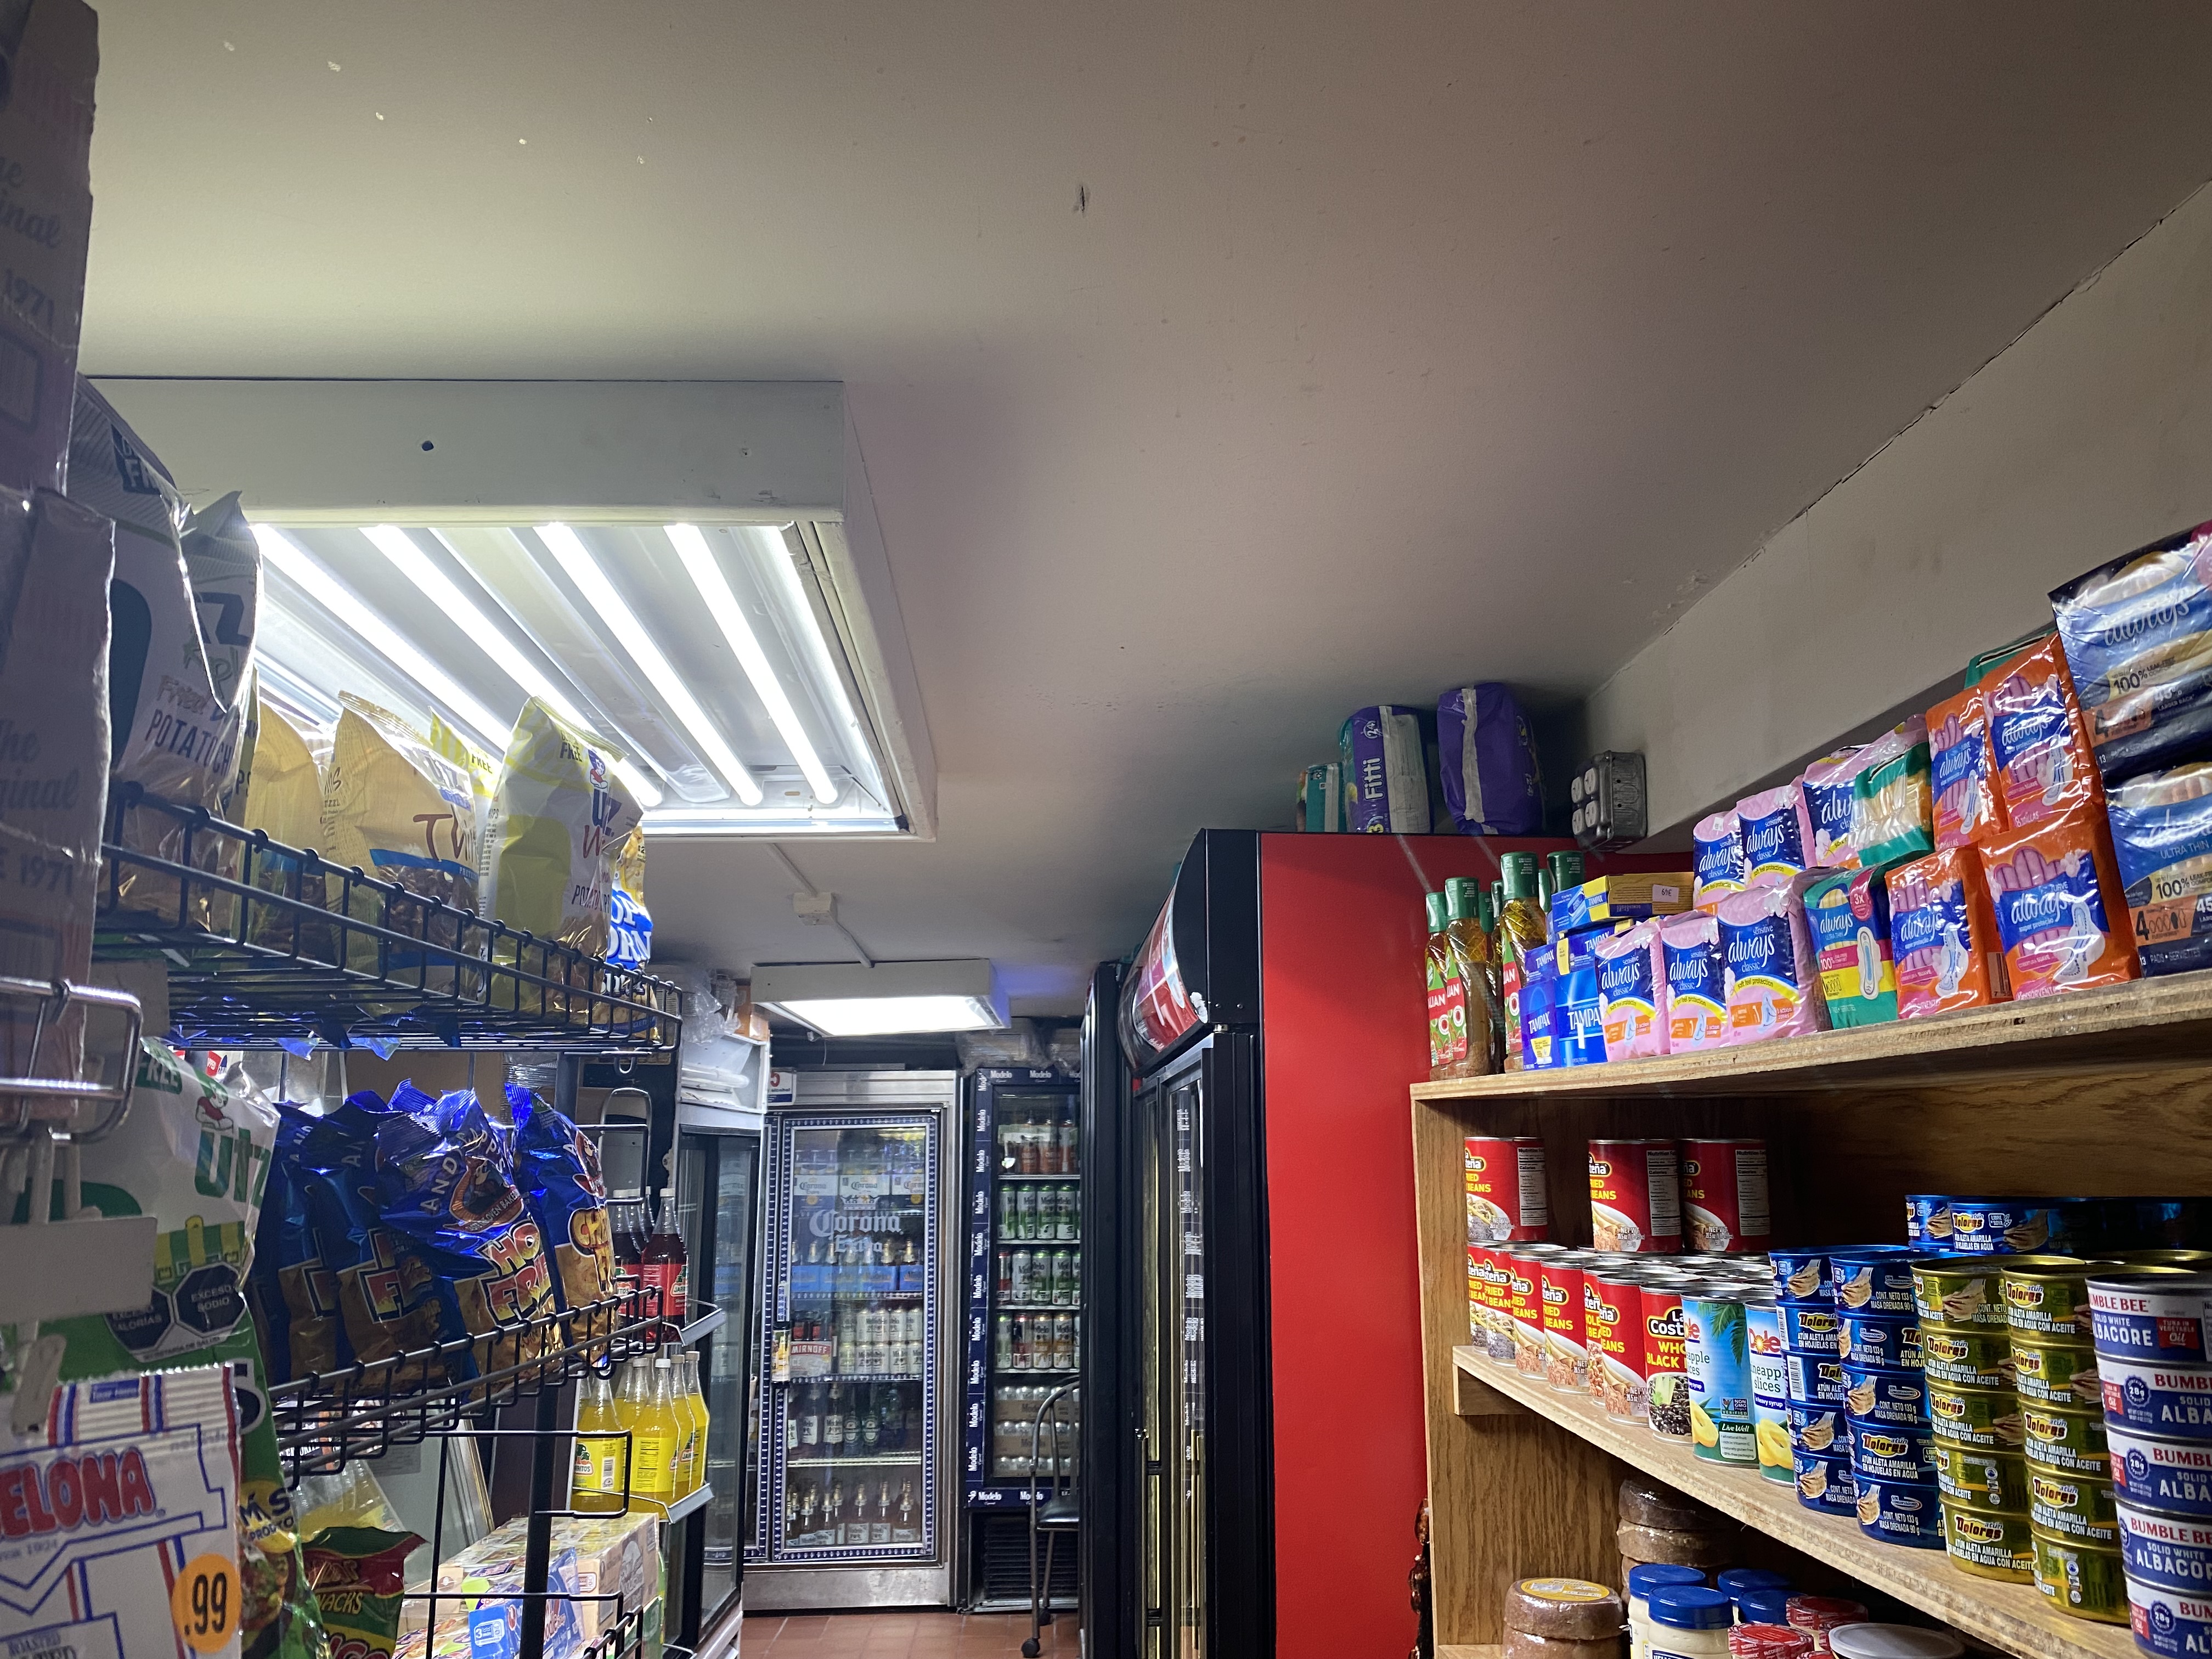 Deli/Grocery Business for sale in NY